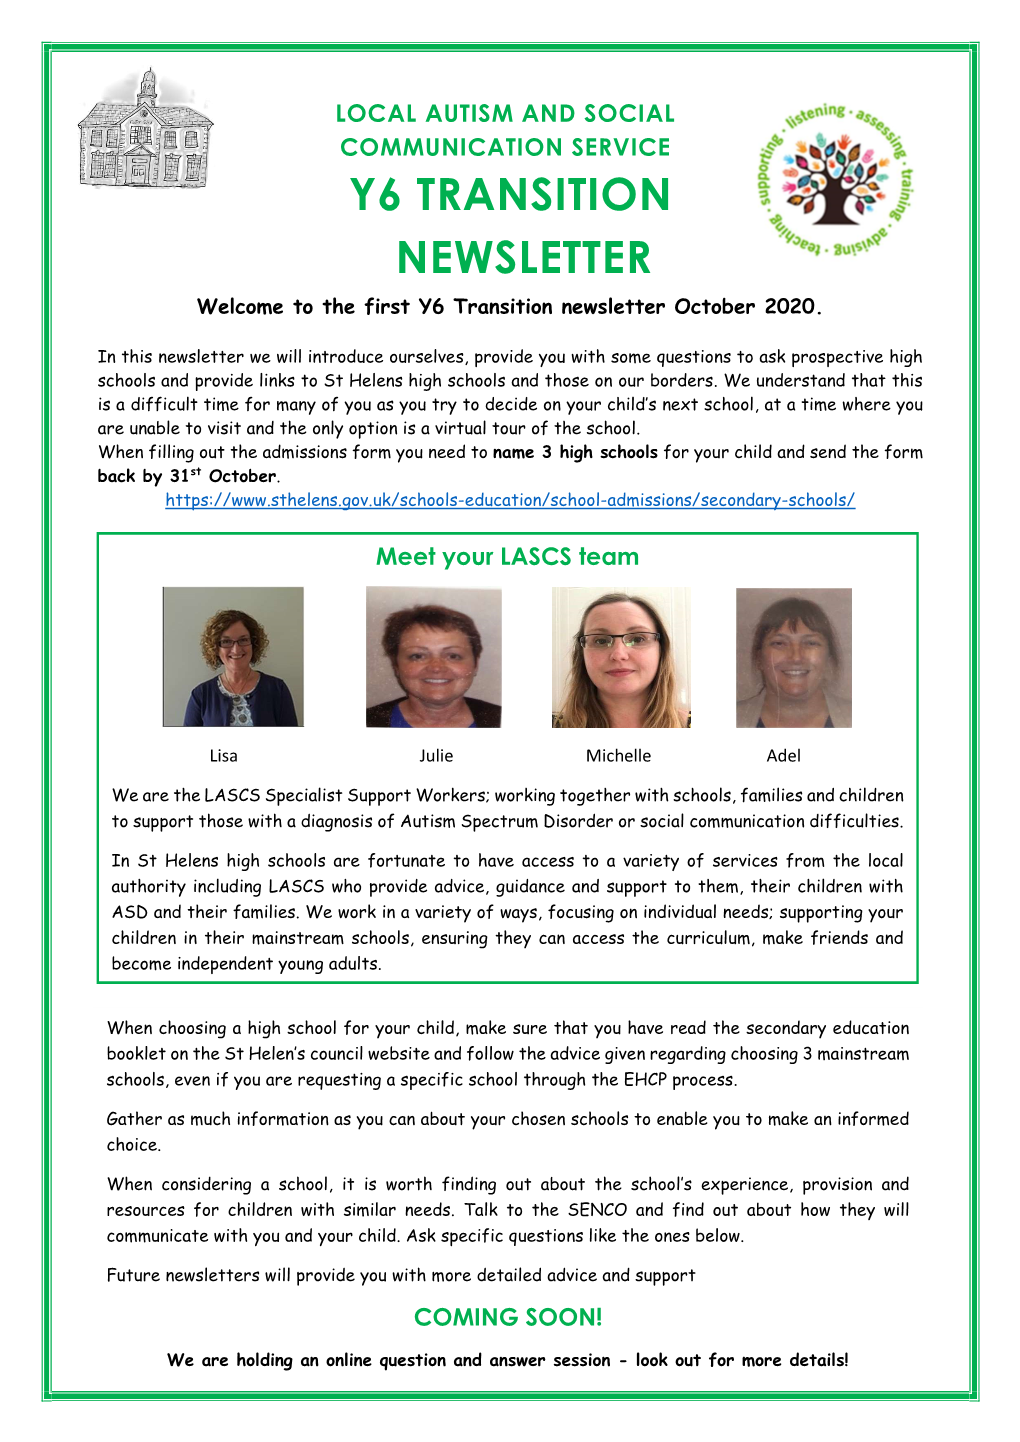 Y6 TRANSITION NEWSLETTER Welcome to the First Y6 Transition Newsletter October 2020